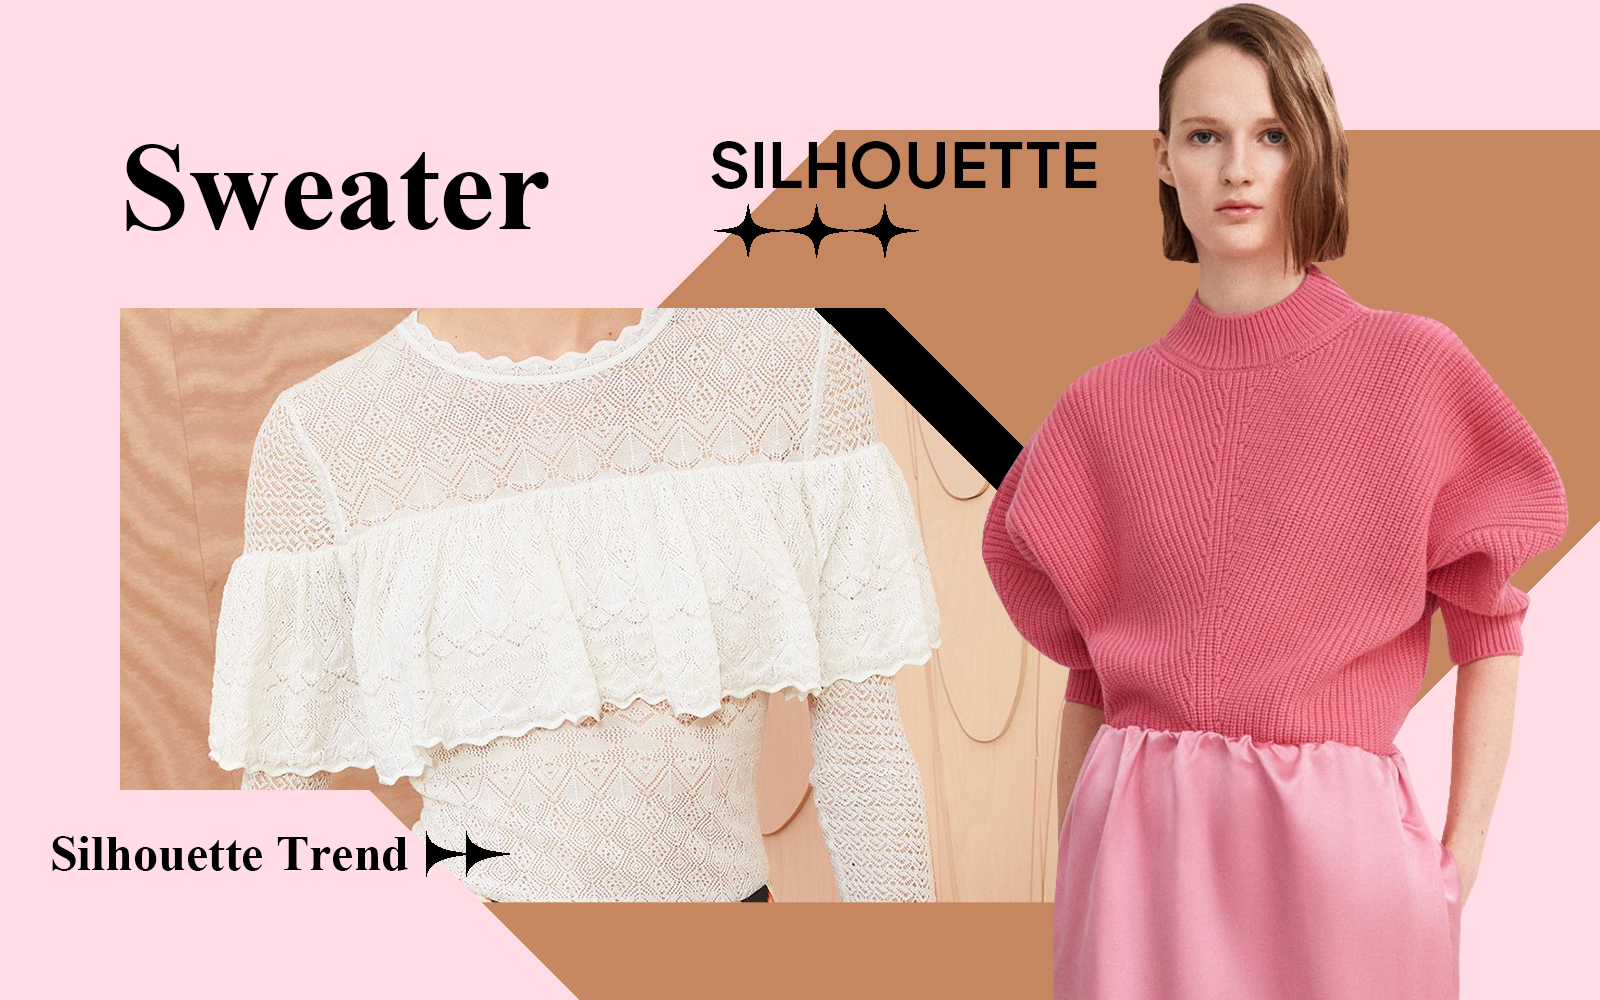 Pullover -- S/S 2025 Silhouette Trend for Women's Knitwear